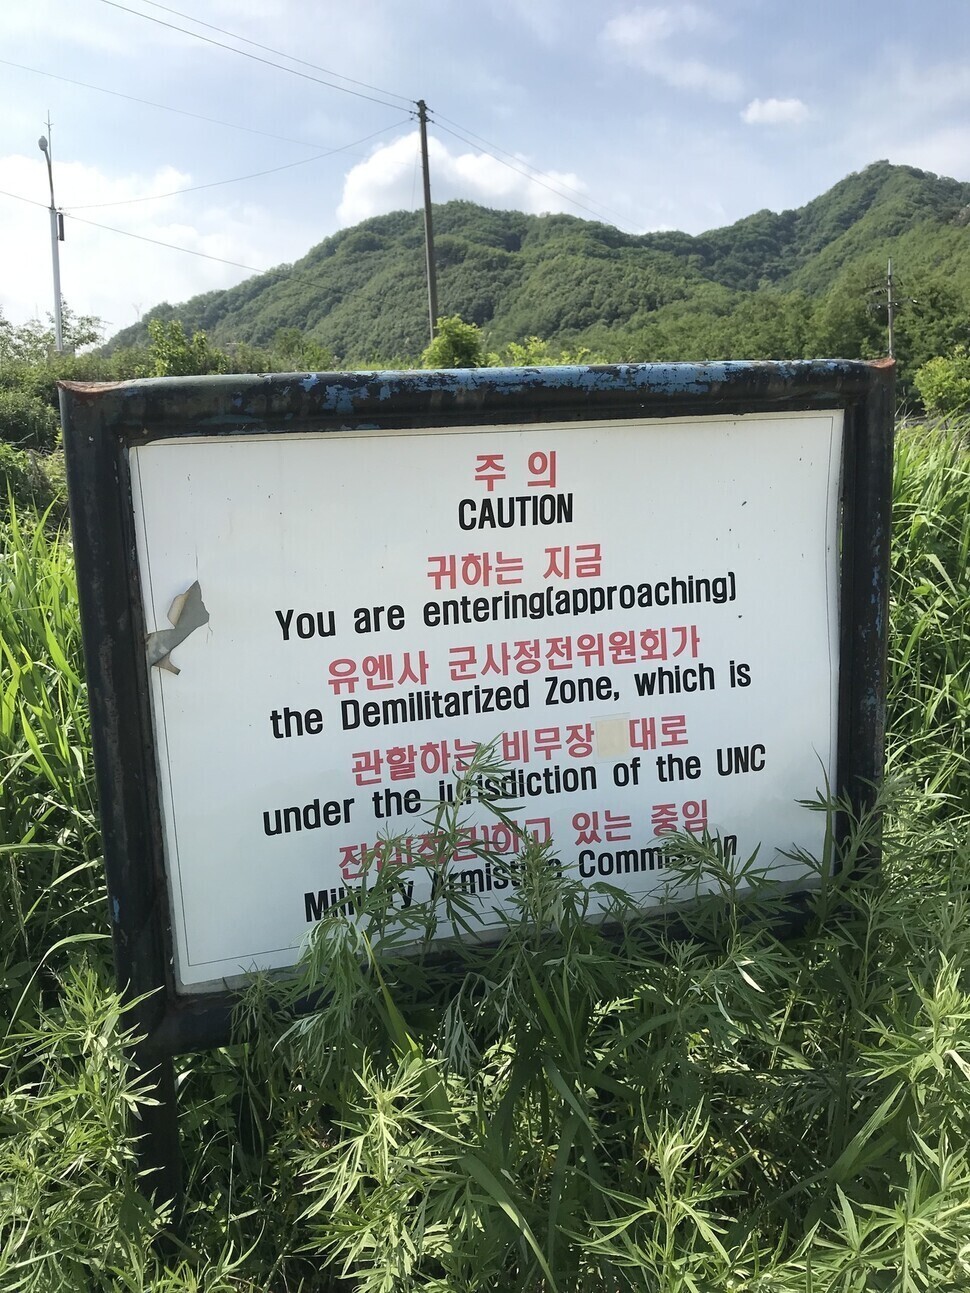 A sign near the DMZ in Cheorwon County, Gangwon Province, states that the DMZ is under the jurisdiction of the UN Command. The DMZ remains under the jurisdiction of the UNC, and the maintenance of the ROK Army. (Kwon Hyuk-chul/The Hankyoreh)